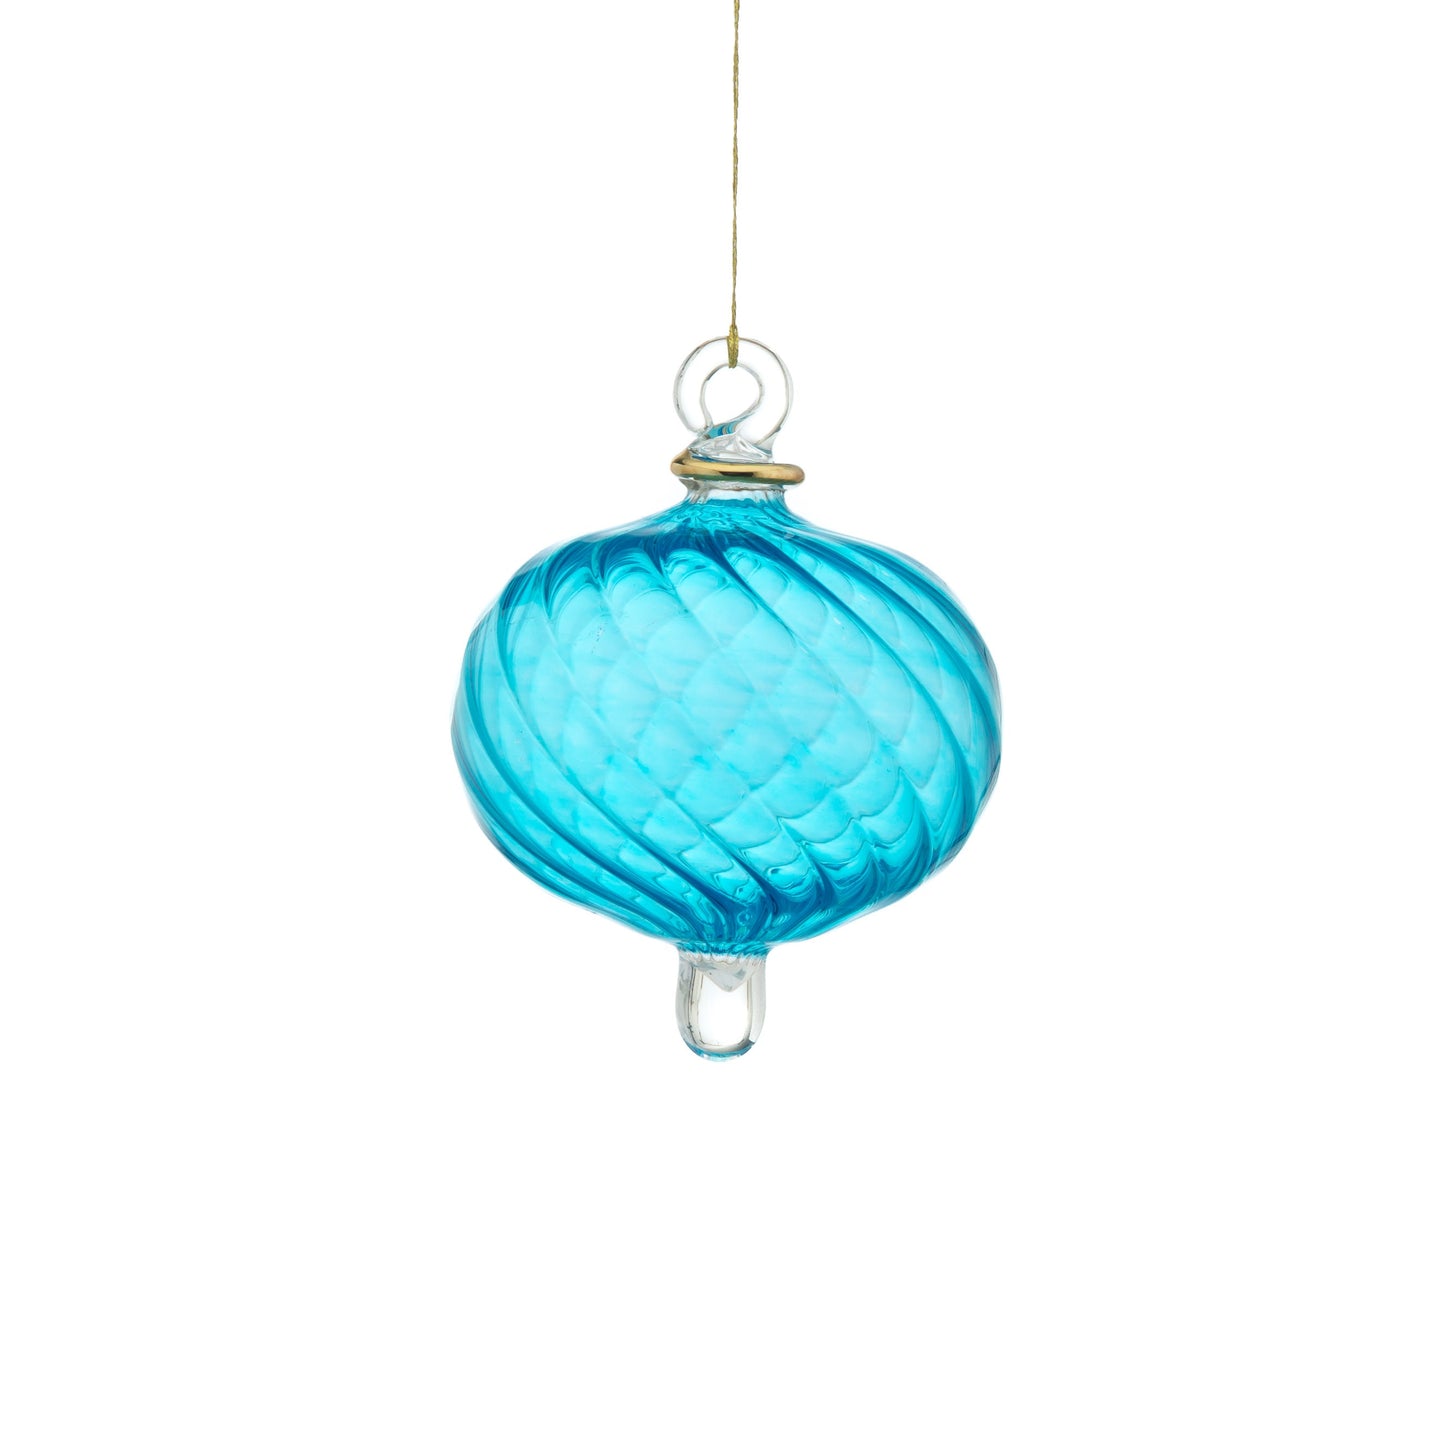 Large Ribbed Glass Tree topper ornament for Christmas tree decorations